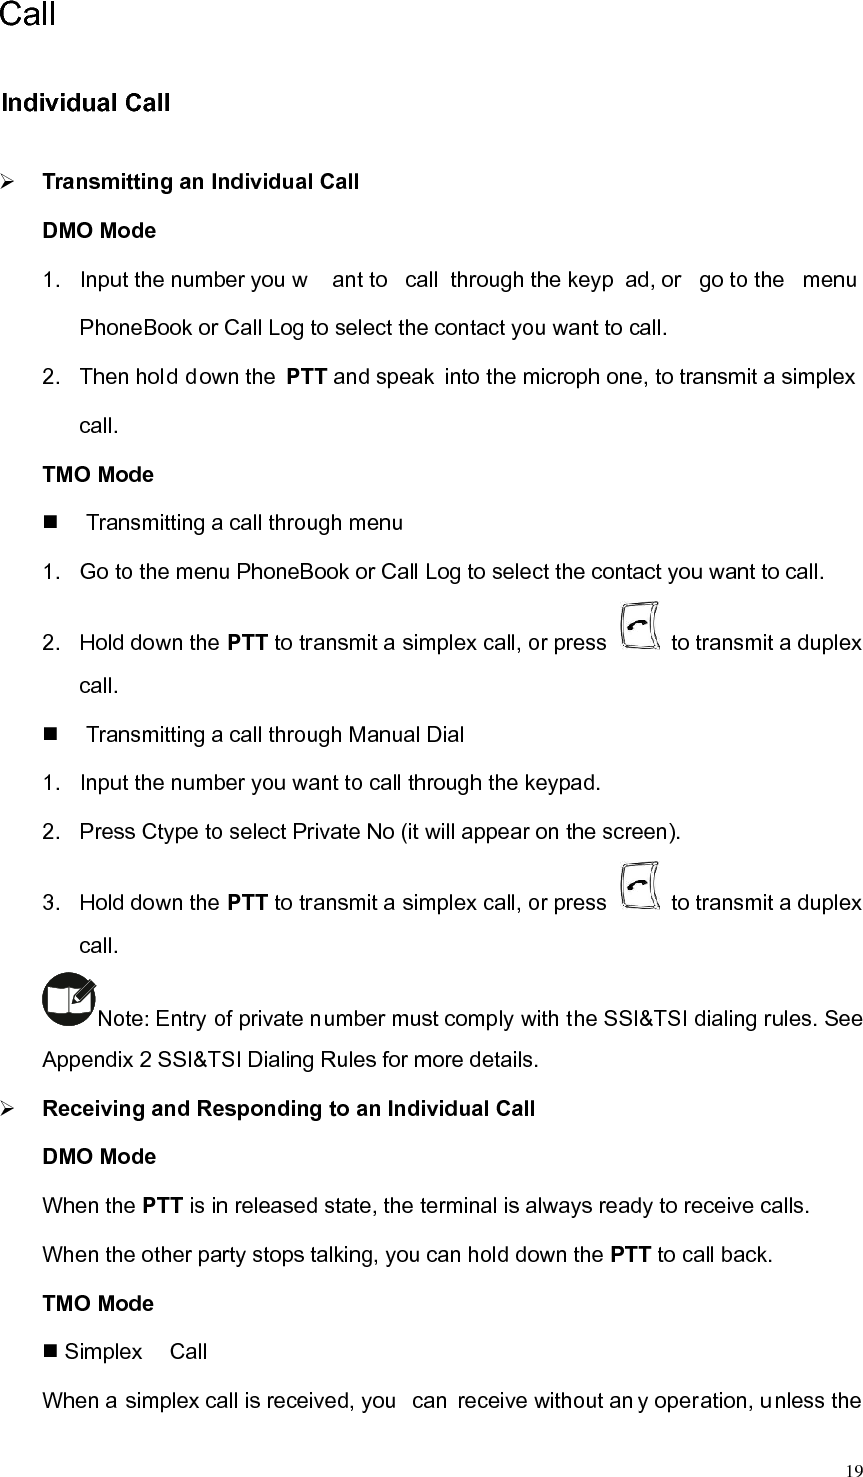   19Call Individual Call   ¾ Transmitting an Individual Call DMO Mode 1.  Input the number you w ant to  call through the keyp ad, or  go to the  menu  PhoneBook or Call Log to select the contact you want to call.   2.  Then hold down the PTT and speak  into the microph one, to transmit a simplex call.  TMO Mode     Transmitting a call through menu 1.  Go to the menu PhoneBook or Call Log to select the contact you want to call. 2.  Hold down the PTT to transmit a simplex call, or press    to transmit a duplex call.    Transmitting a call through Manual Dial   1.  Input the number you want to call through the keypad.   2.  Press Ctype to select Private No (it will appear on the screen).   3.  Hold down the PTT to transmit a simplex call, or press    to transmit a duplex call.  Note: Entry of private number must comply with the SSI&amp;TSI dialing rules. See Appendix 2 SSI&amp;TSI Dialing Rules for more details.   ¾ Receiving and Responding to an Individual Call DMO Mode When the PTT is in released state, the terminal is always ready to receive calls.   When the other party stops talking, you can hold down the PTT to call back.   TMO Mode    Simplex Call When a simplex call is received, you  can receive without an y operation, unless the 